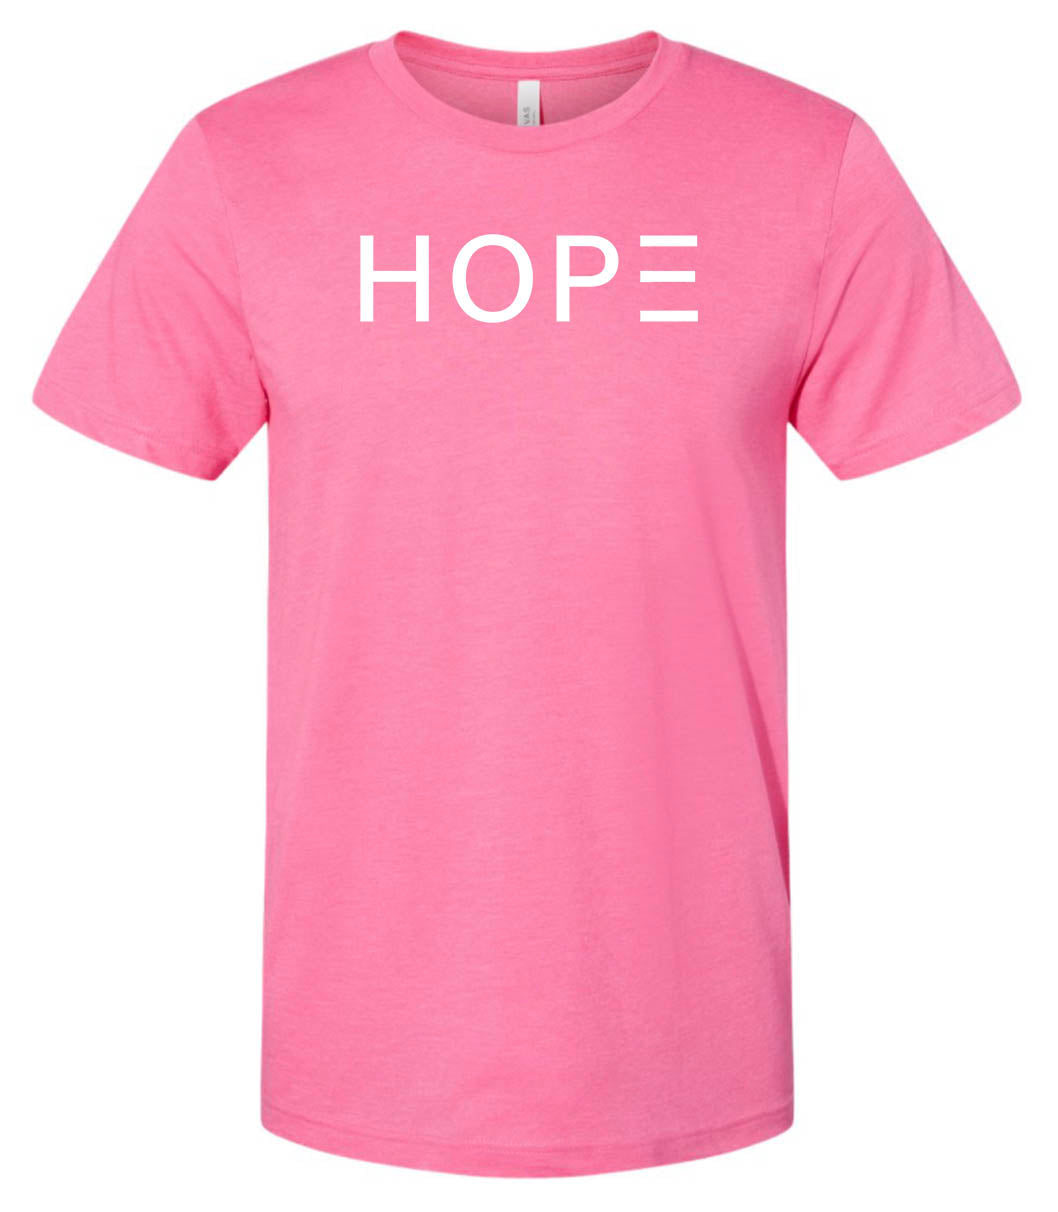 Breast Cancer Awareness - Hope - Short Sleeve Jersey - Pink C 3X